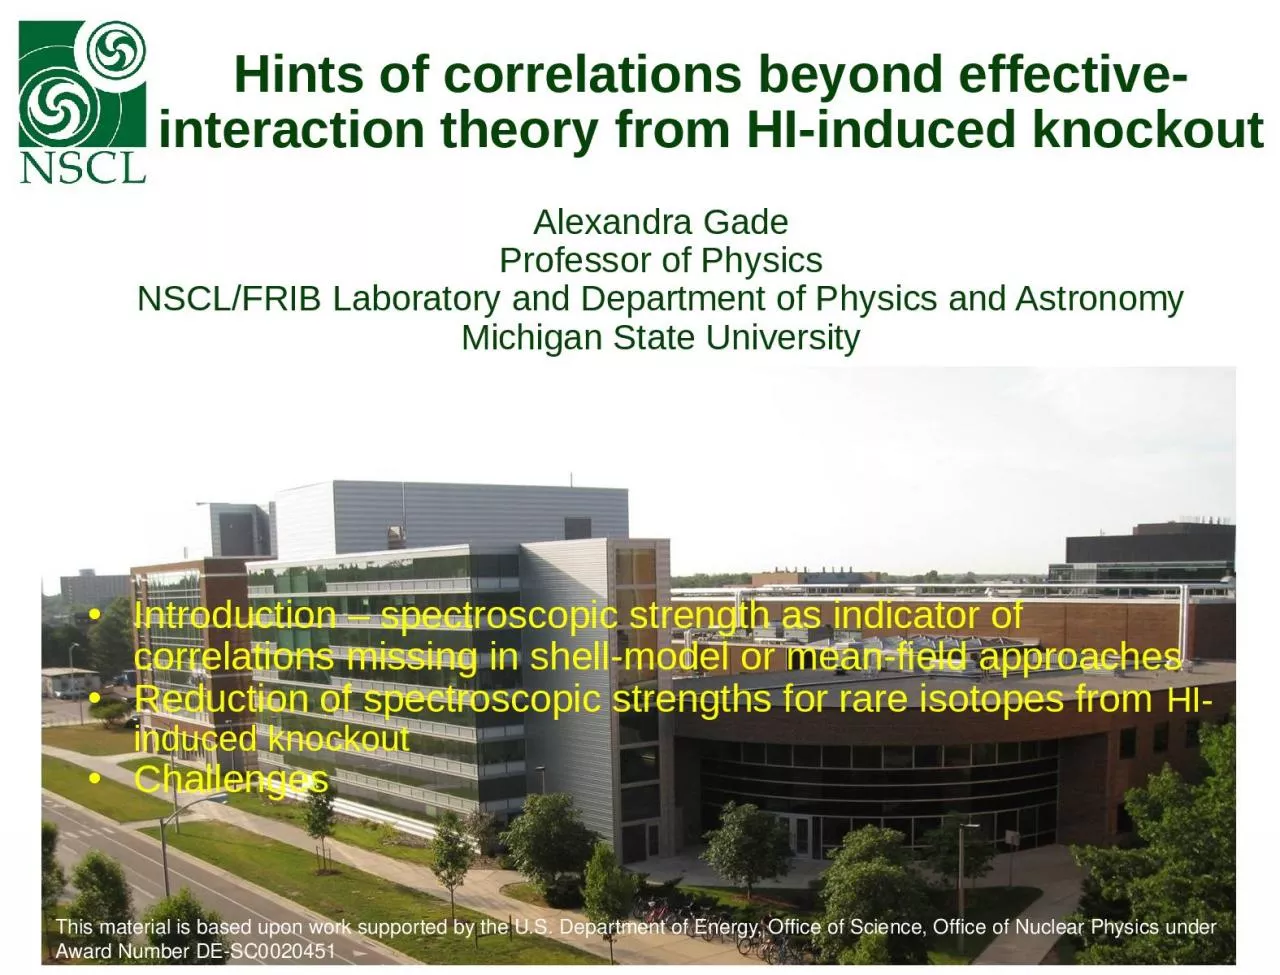 Hints of correlations beyond effective-interaction theory from HI-induced knockout